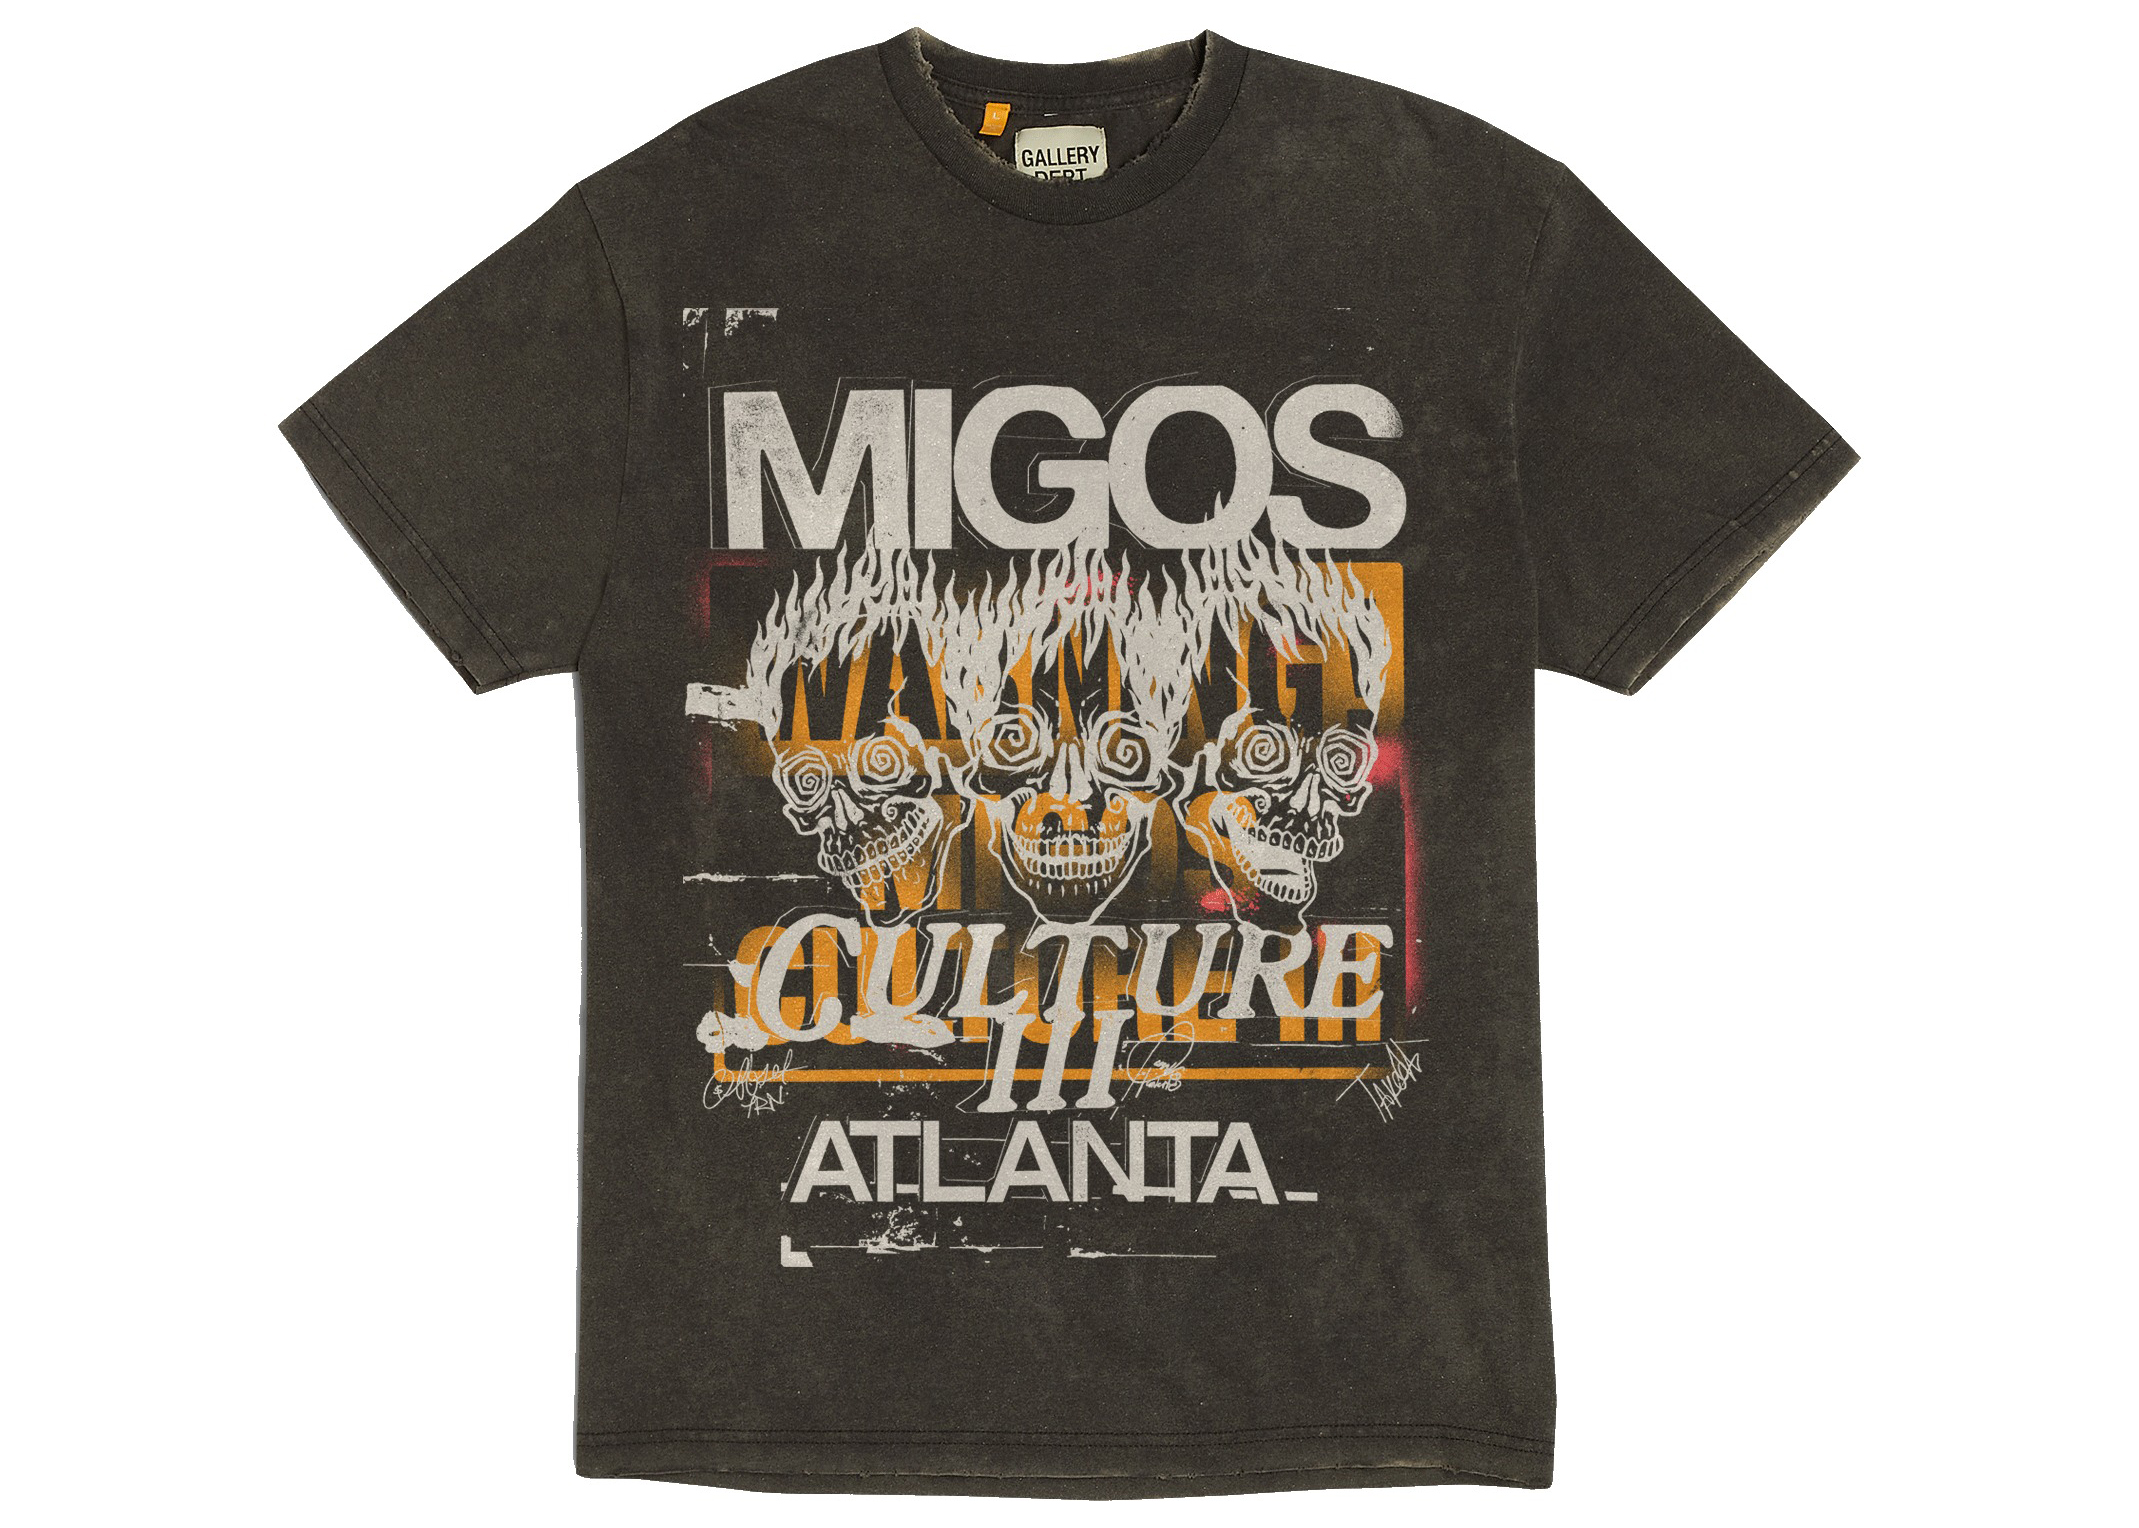 Migos x Gallery Dept. For Culture III Three Skulls T-shirt Washed Black